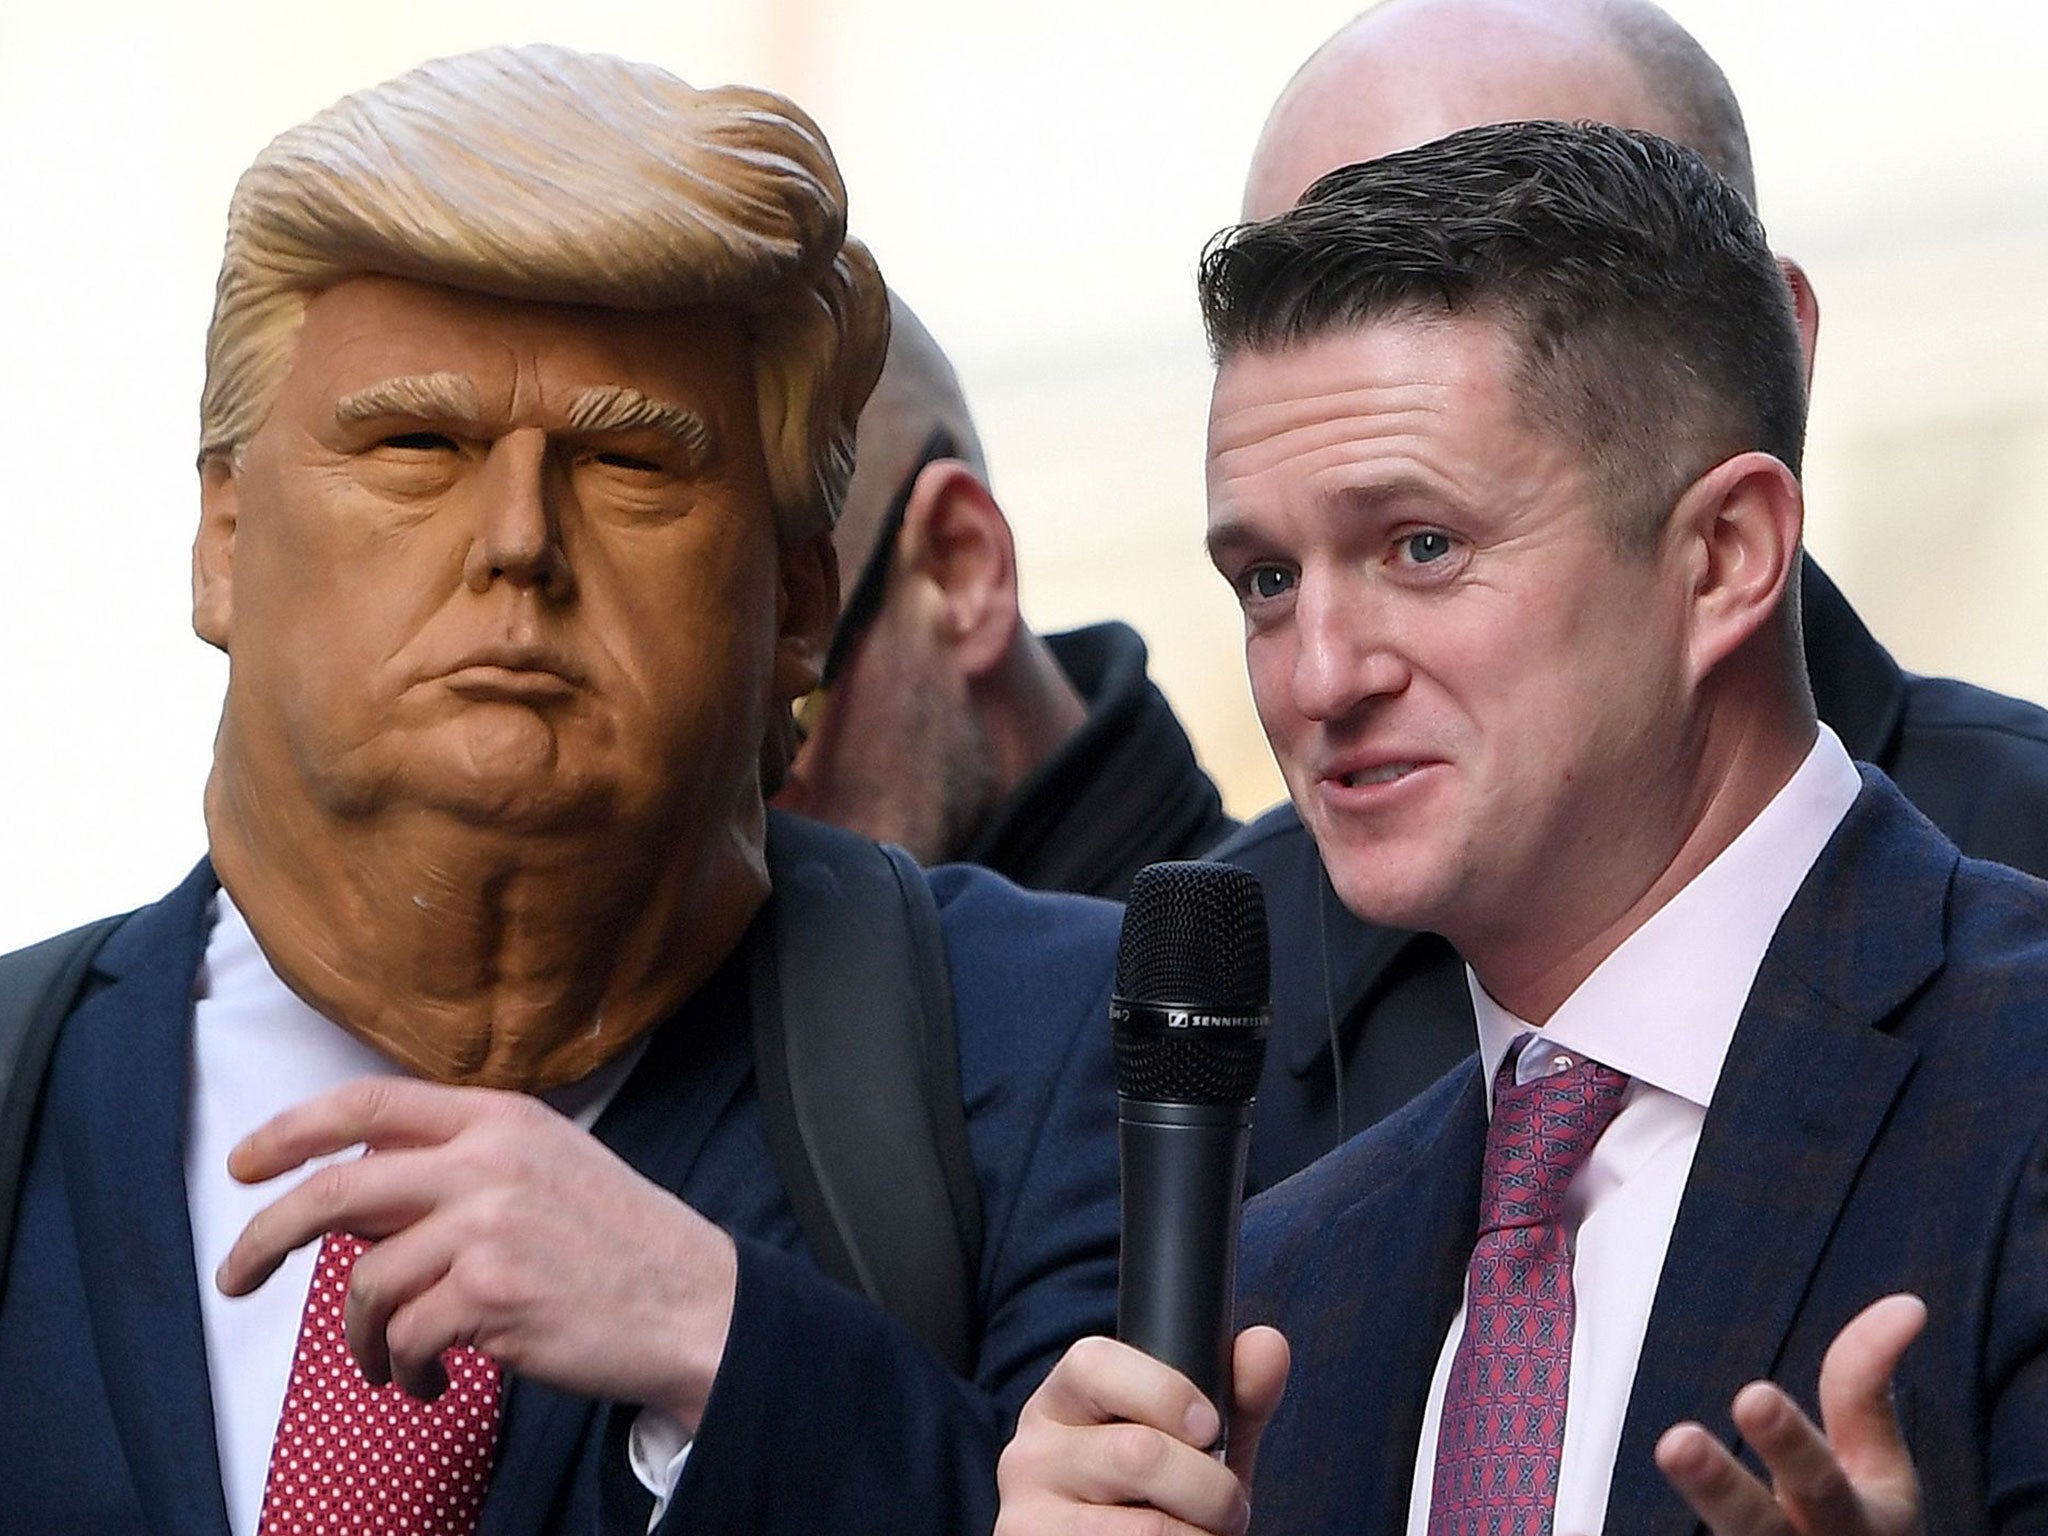 Tommy Robinson with a supporter dressed as Donald Trump addressing a crowd outside the Old Bailey at a rally organised by the Middle East Forum on 23 October (AFP/Getty Images)